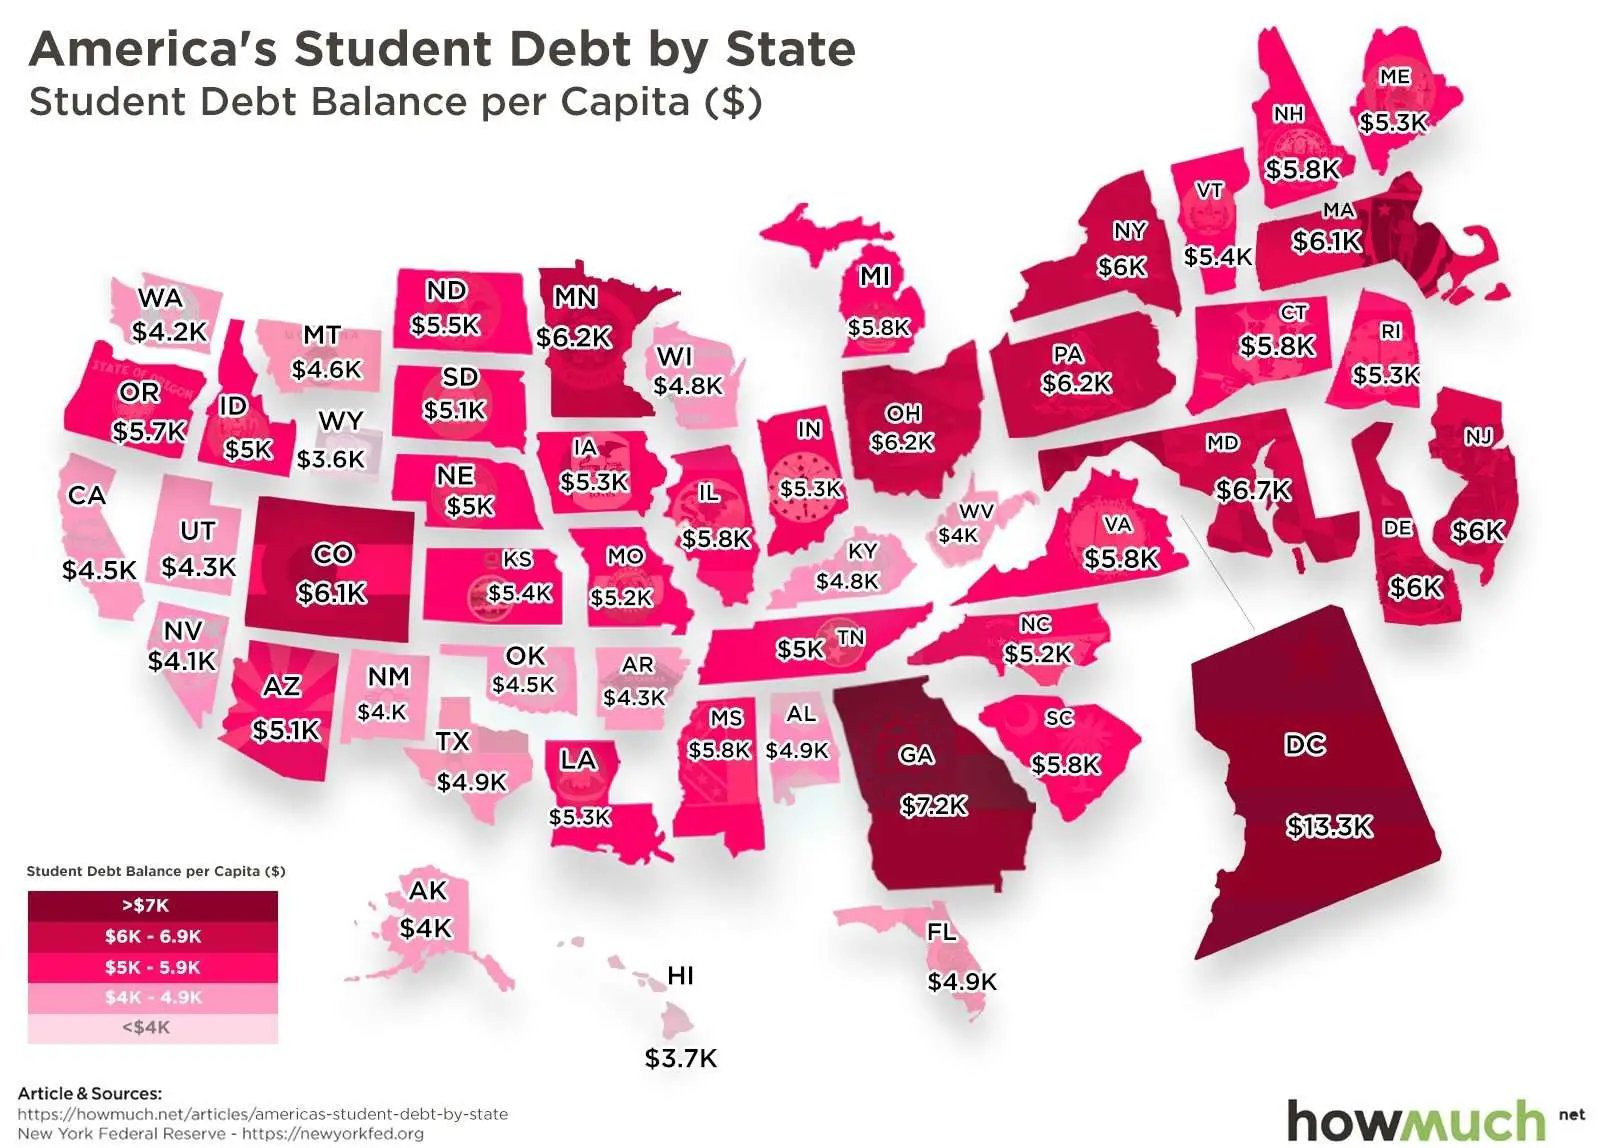 Visualizing Americas Student Debt by State